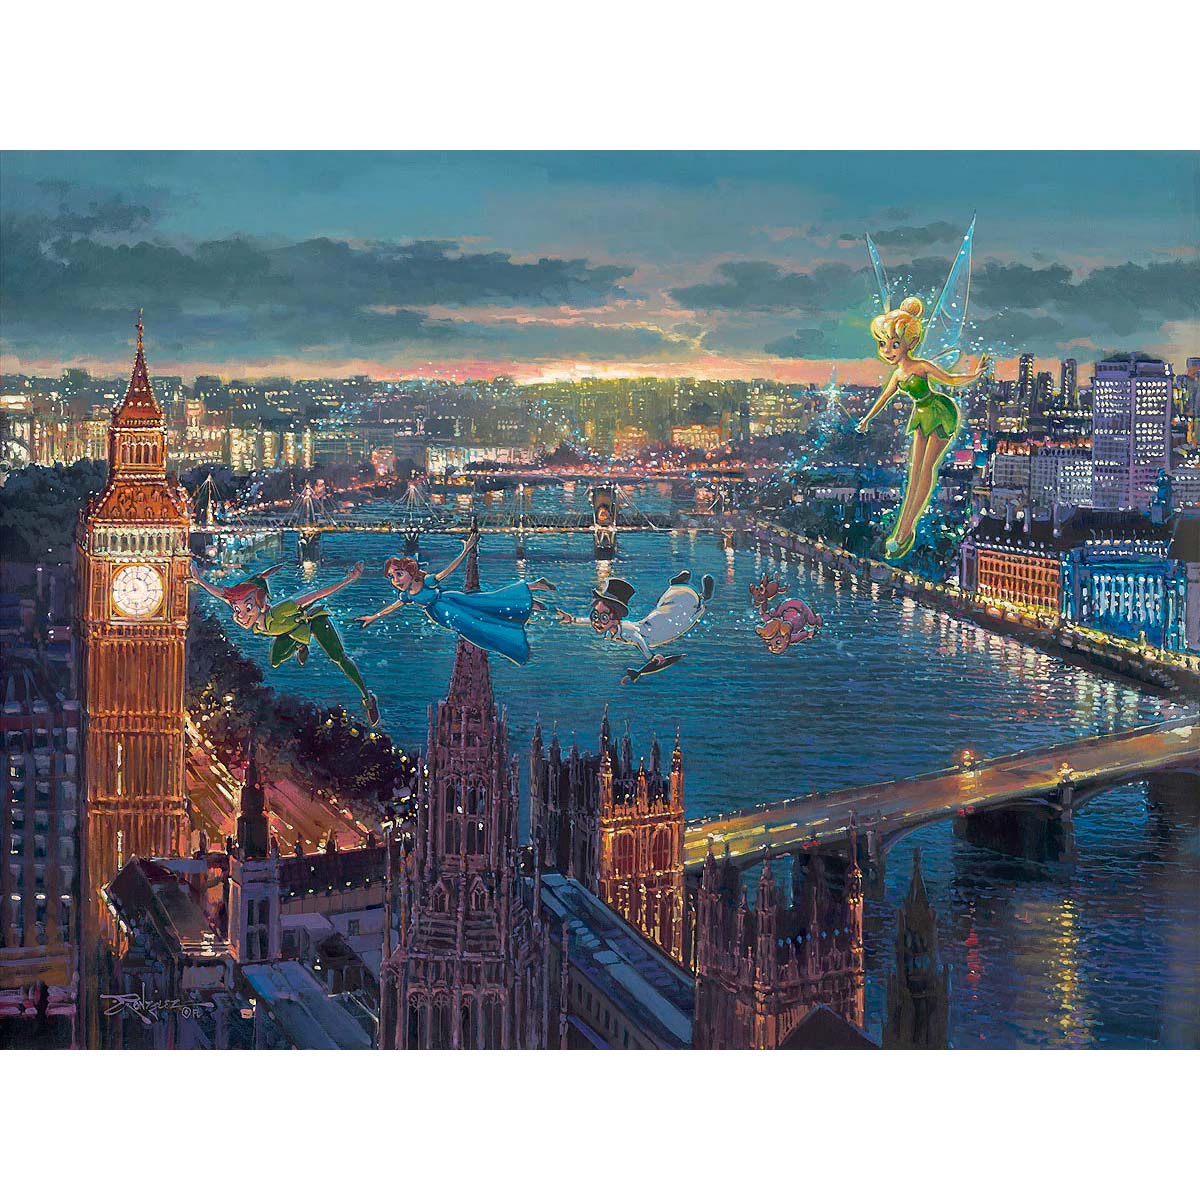 Rodel Gonzalez Disney "Peter Pan in London" Limited Edition Canvas Giclee